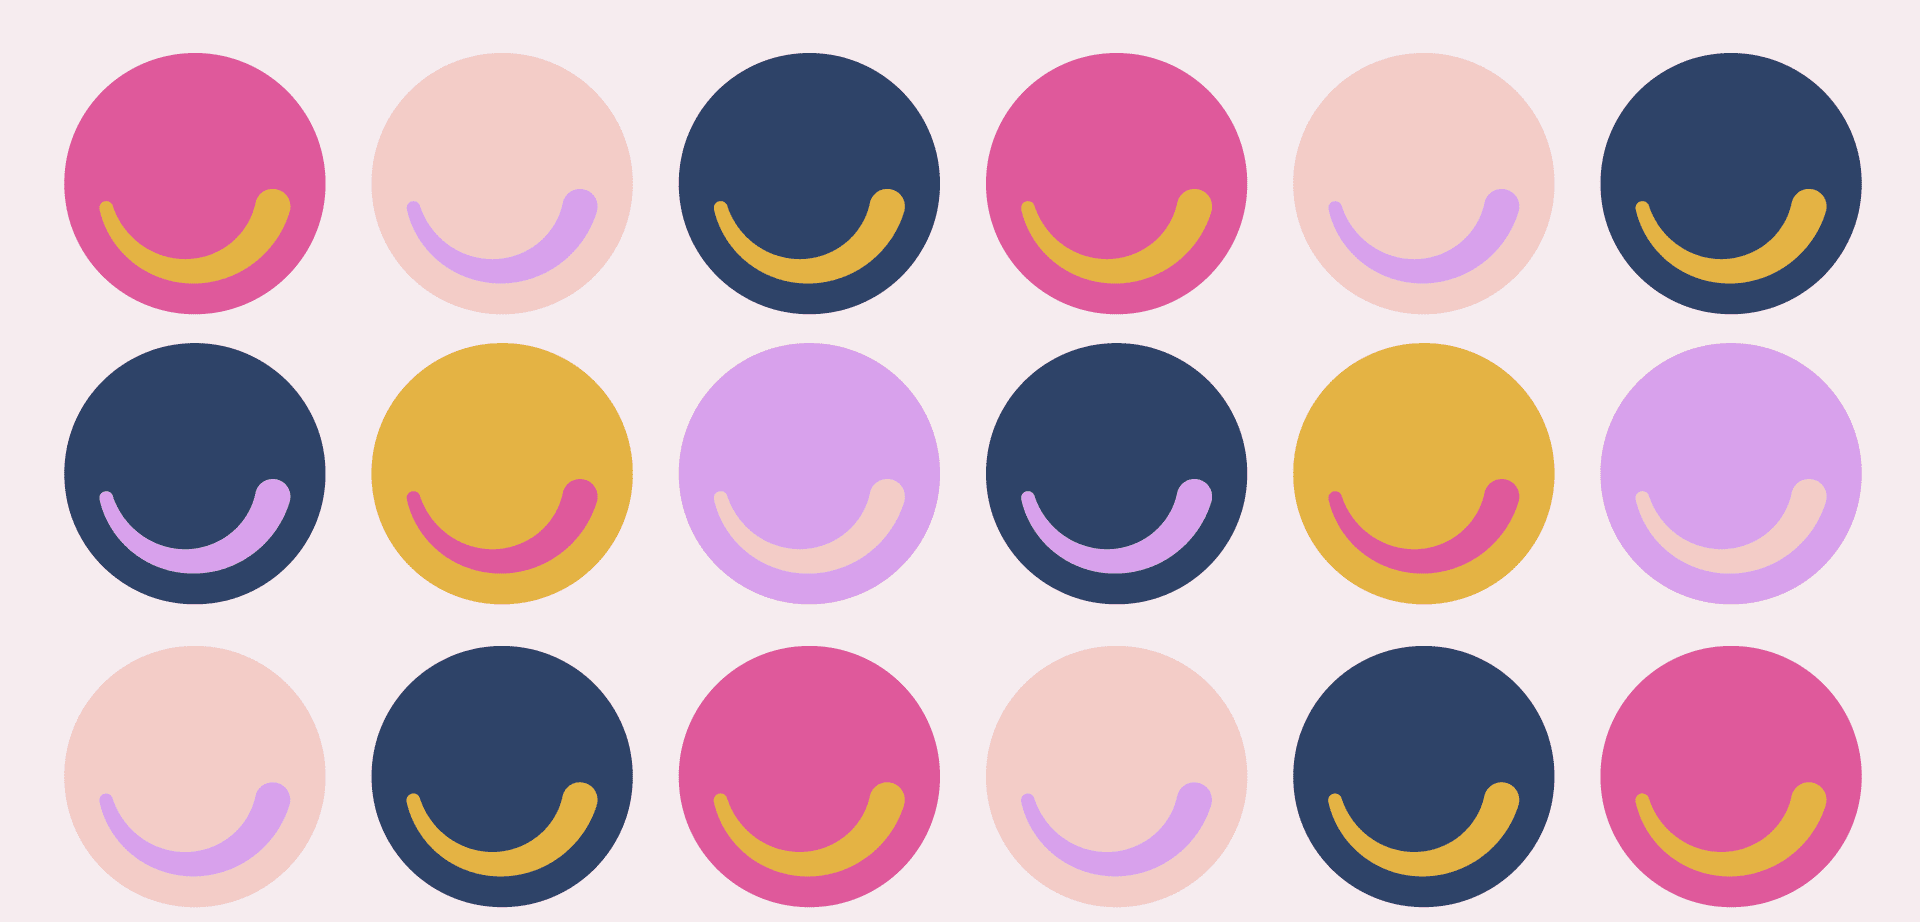 A bunch of different colored circles with faces